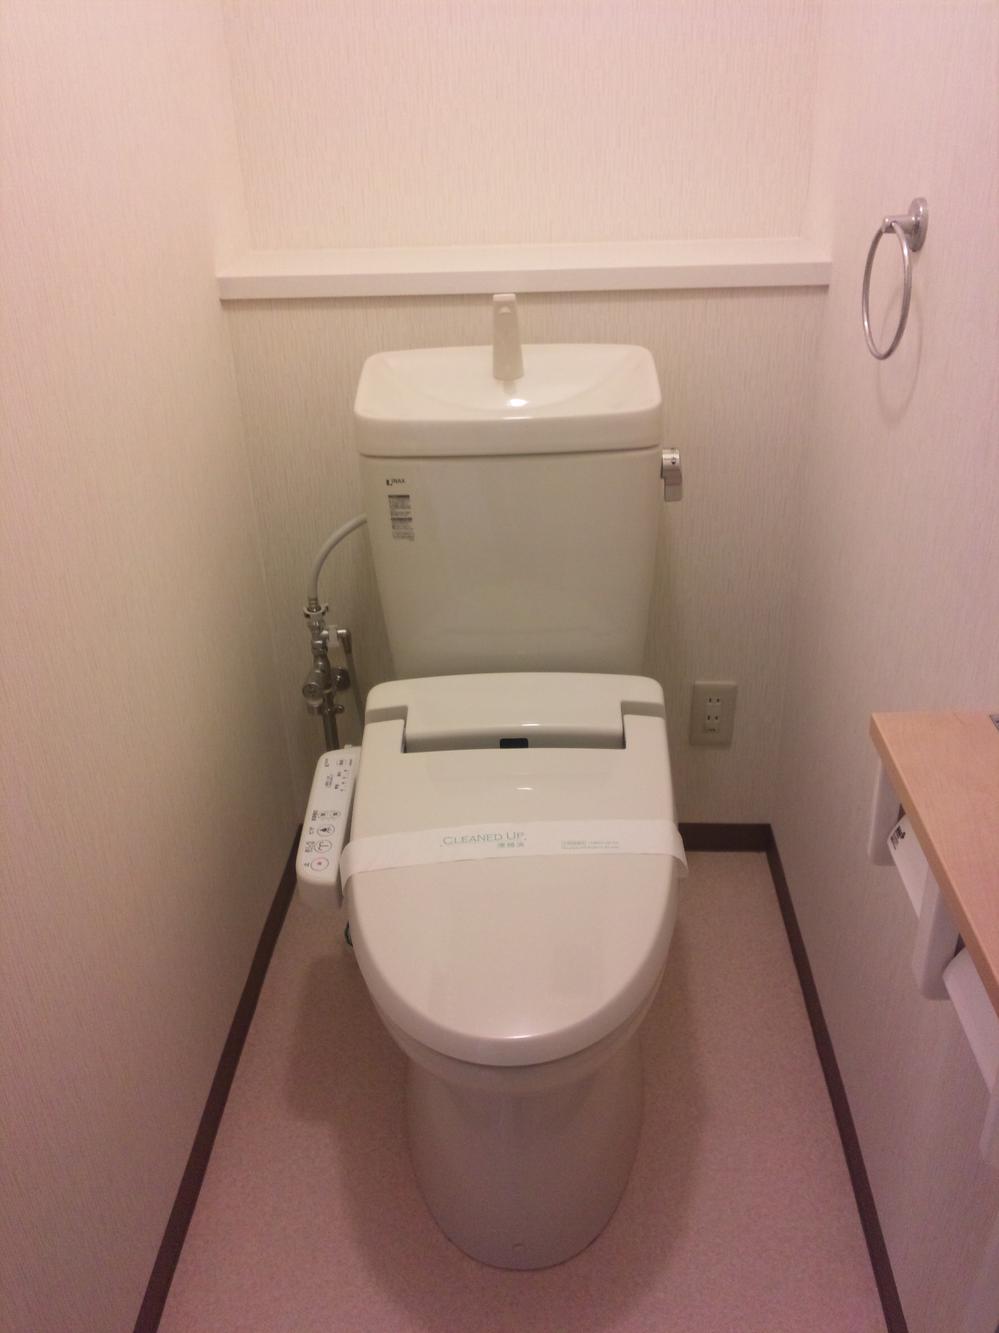 Toilet. It is a newly made toilet